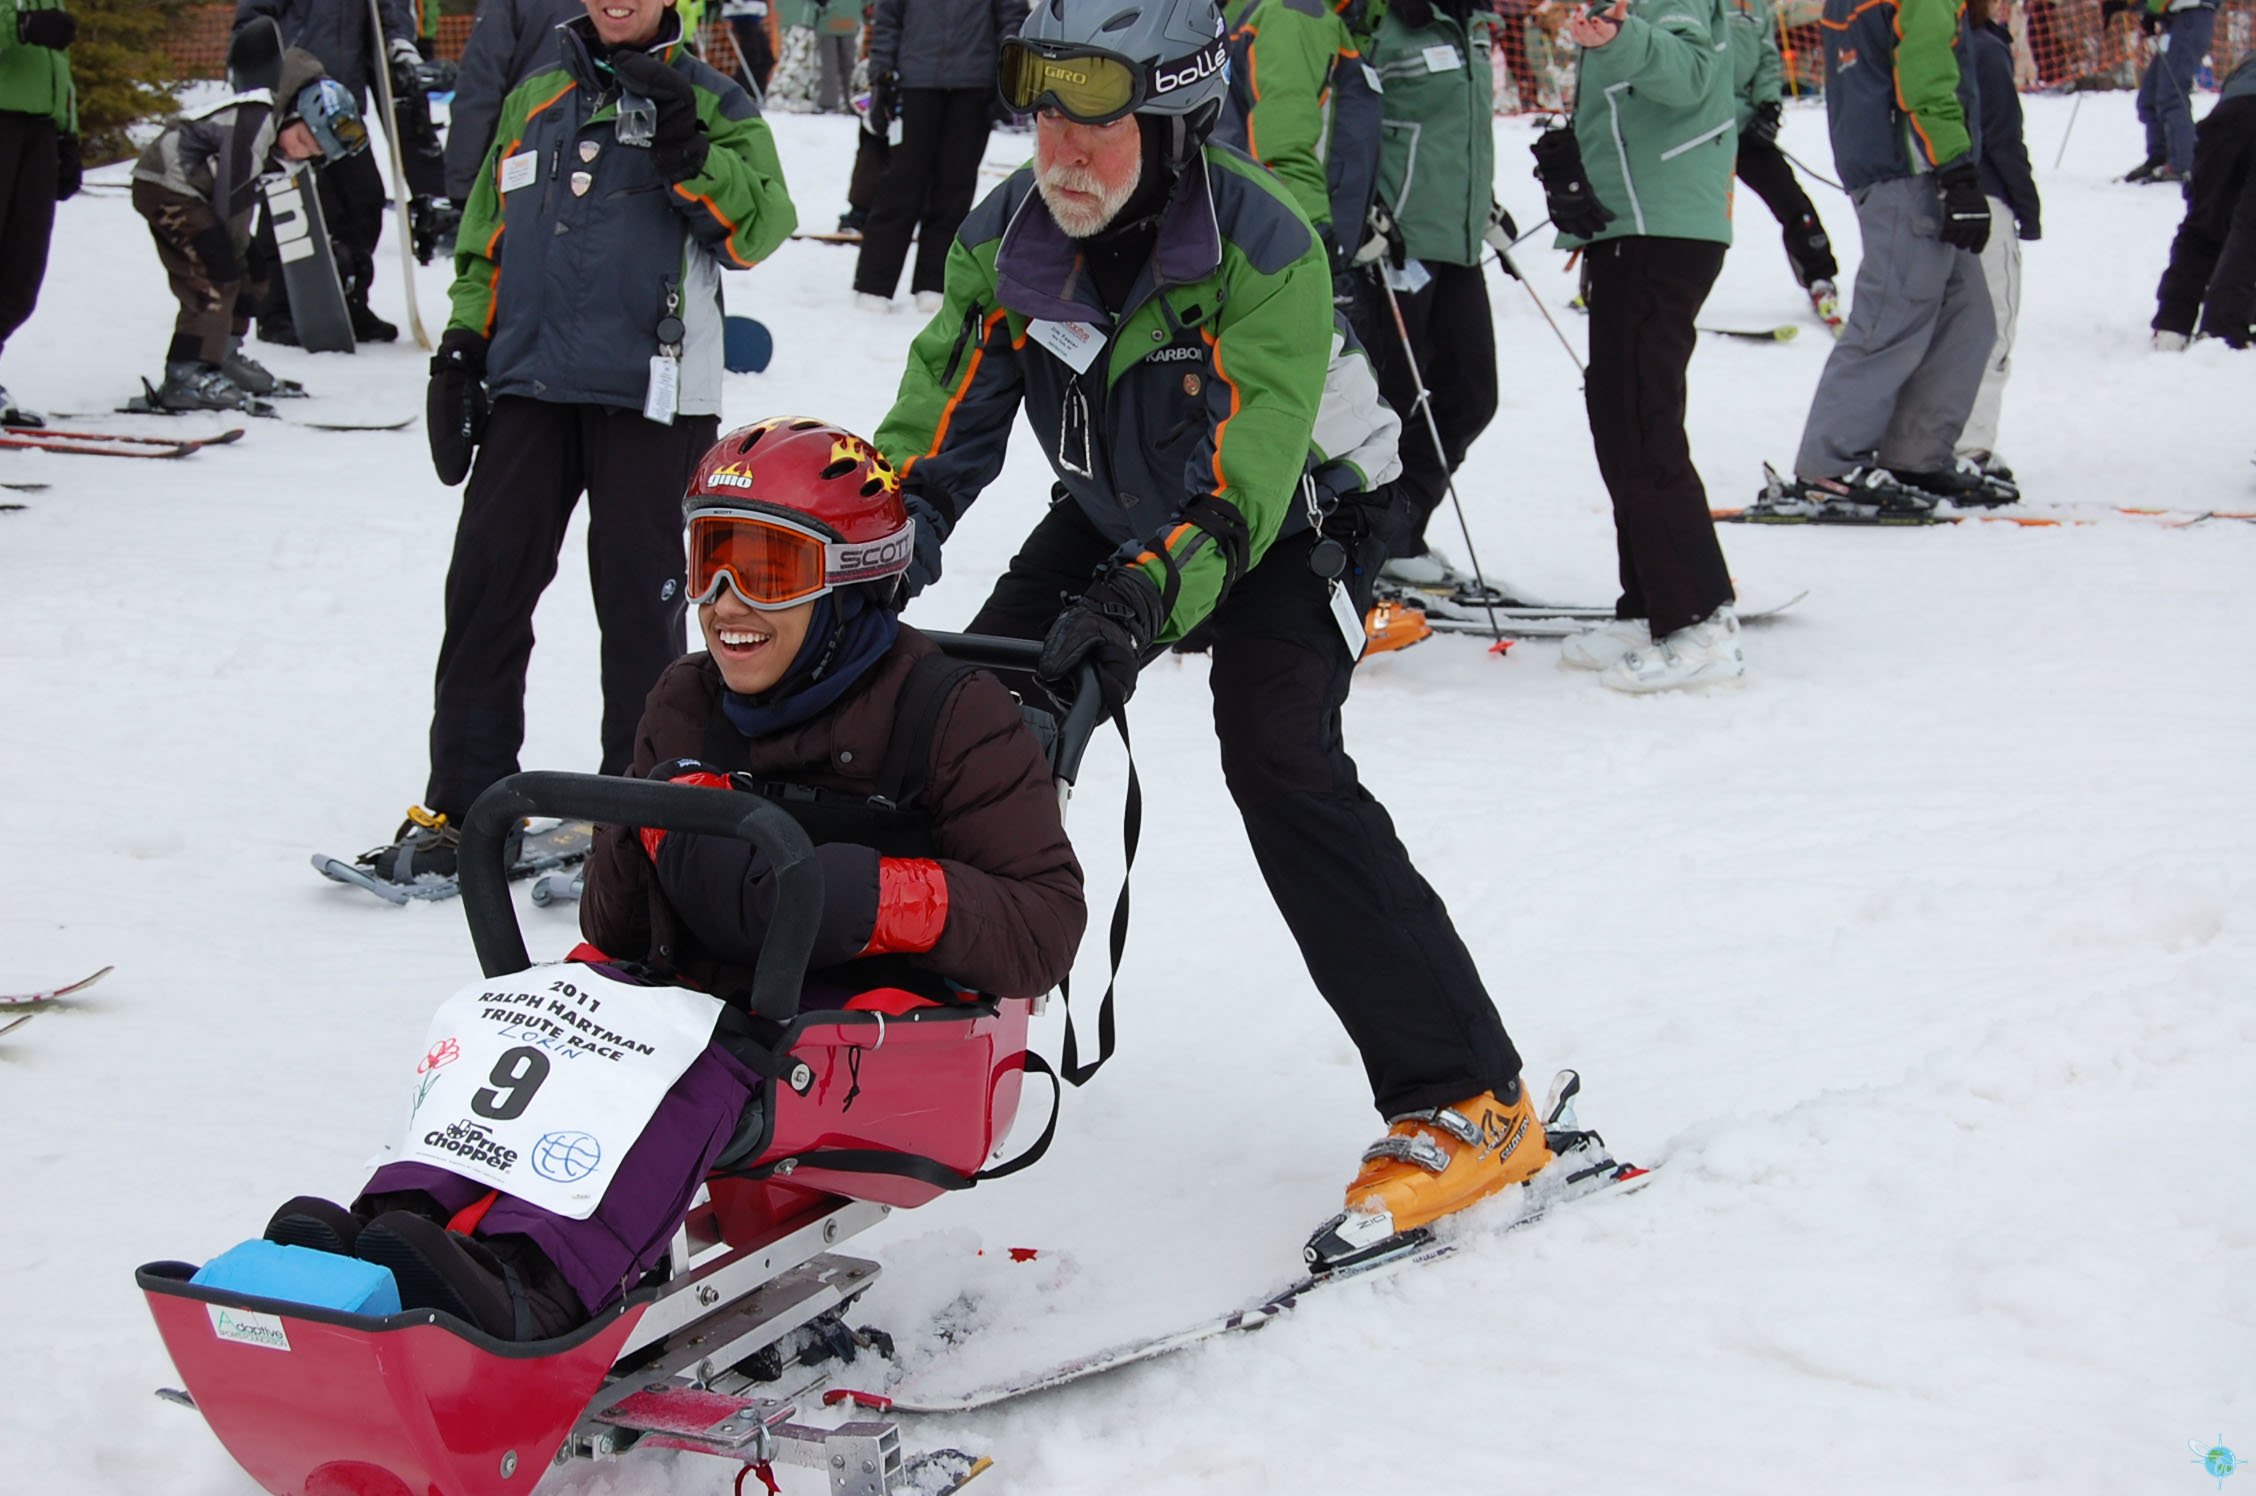 Man with disability and Winter Sports, handicapped persons and Mono Ski,  handicapped racer goes downhill on mono ski Stock Photo